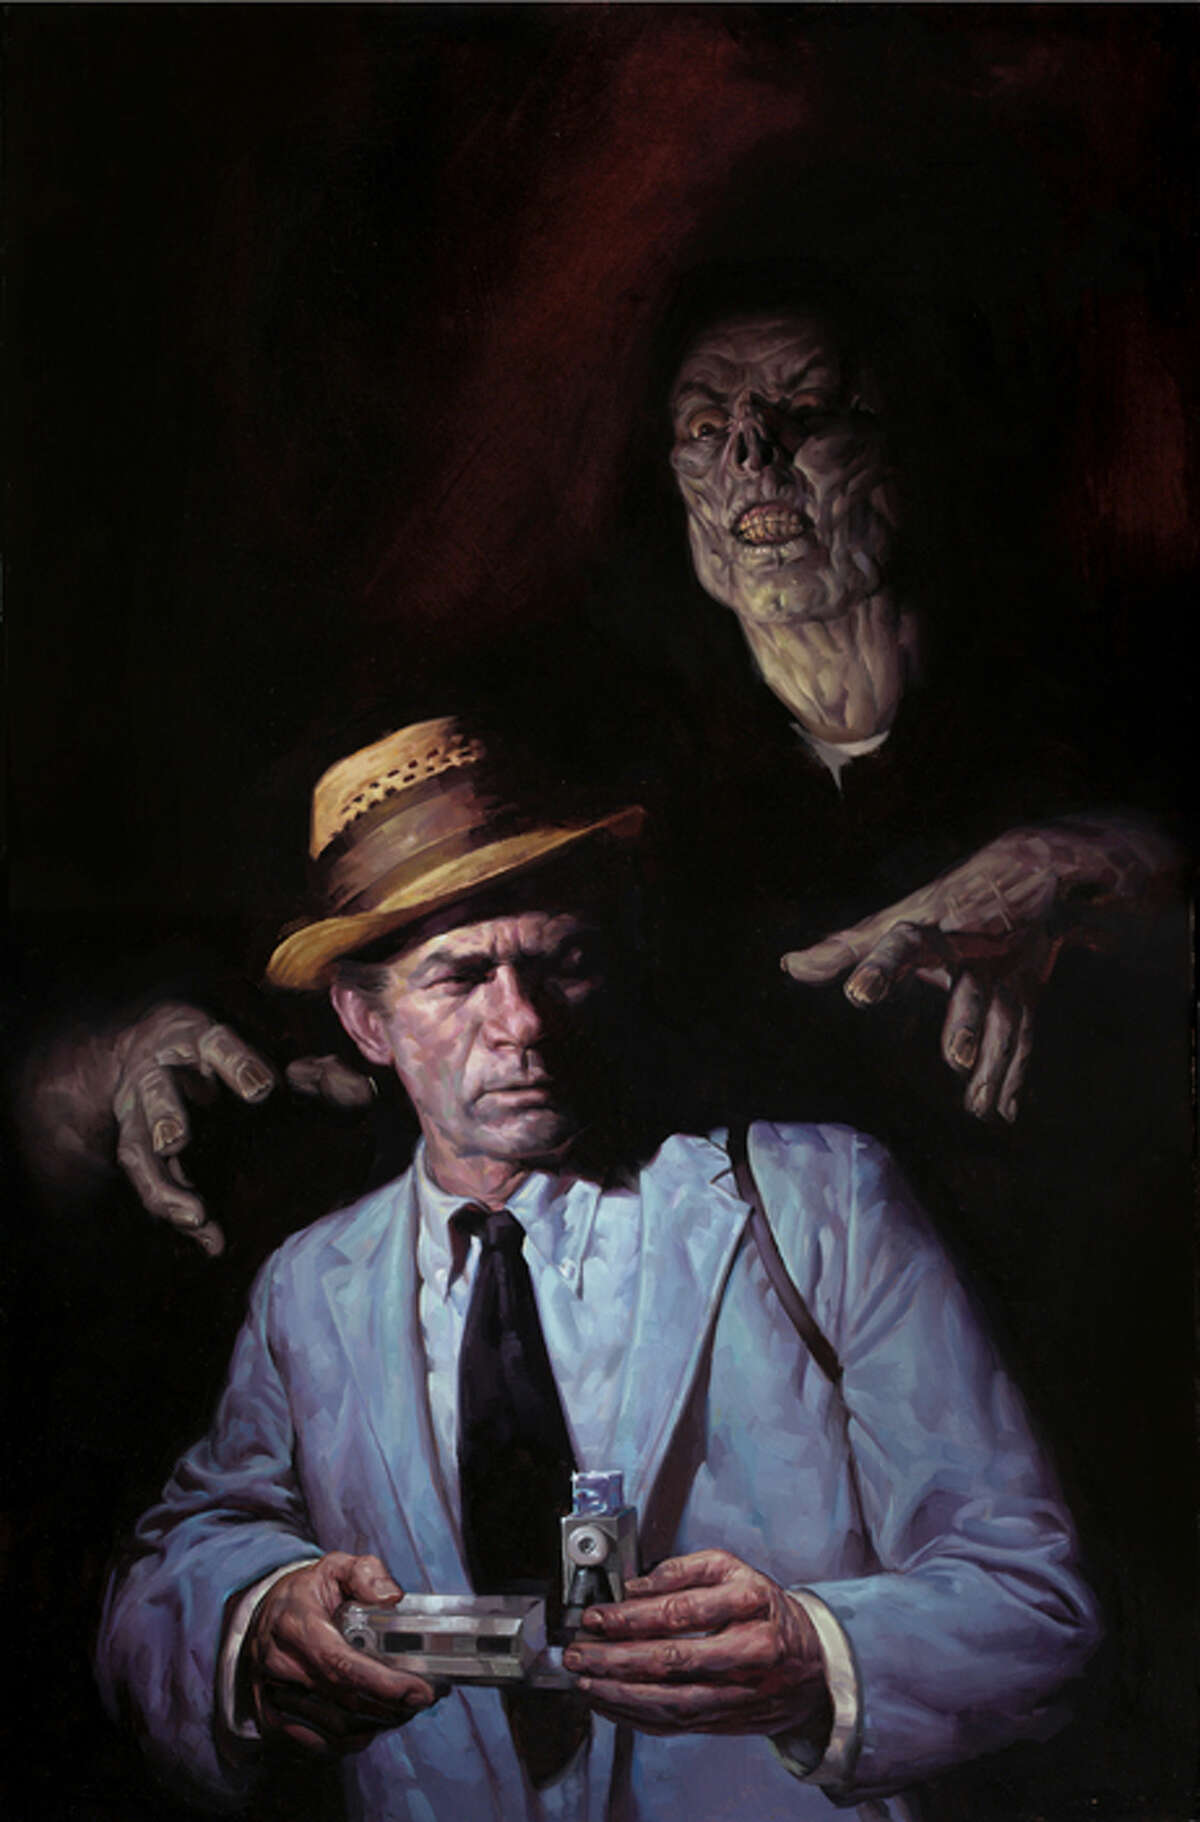 In 1973, reporter Carl Kolchak is hired by his former editor, Tony Vincenzo, to cover a series of killings in "The Night Strangler." In the Seattle Underground under an old clinic, Kolchak has a face-to-face confrontation with the villain. 